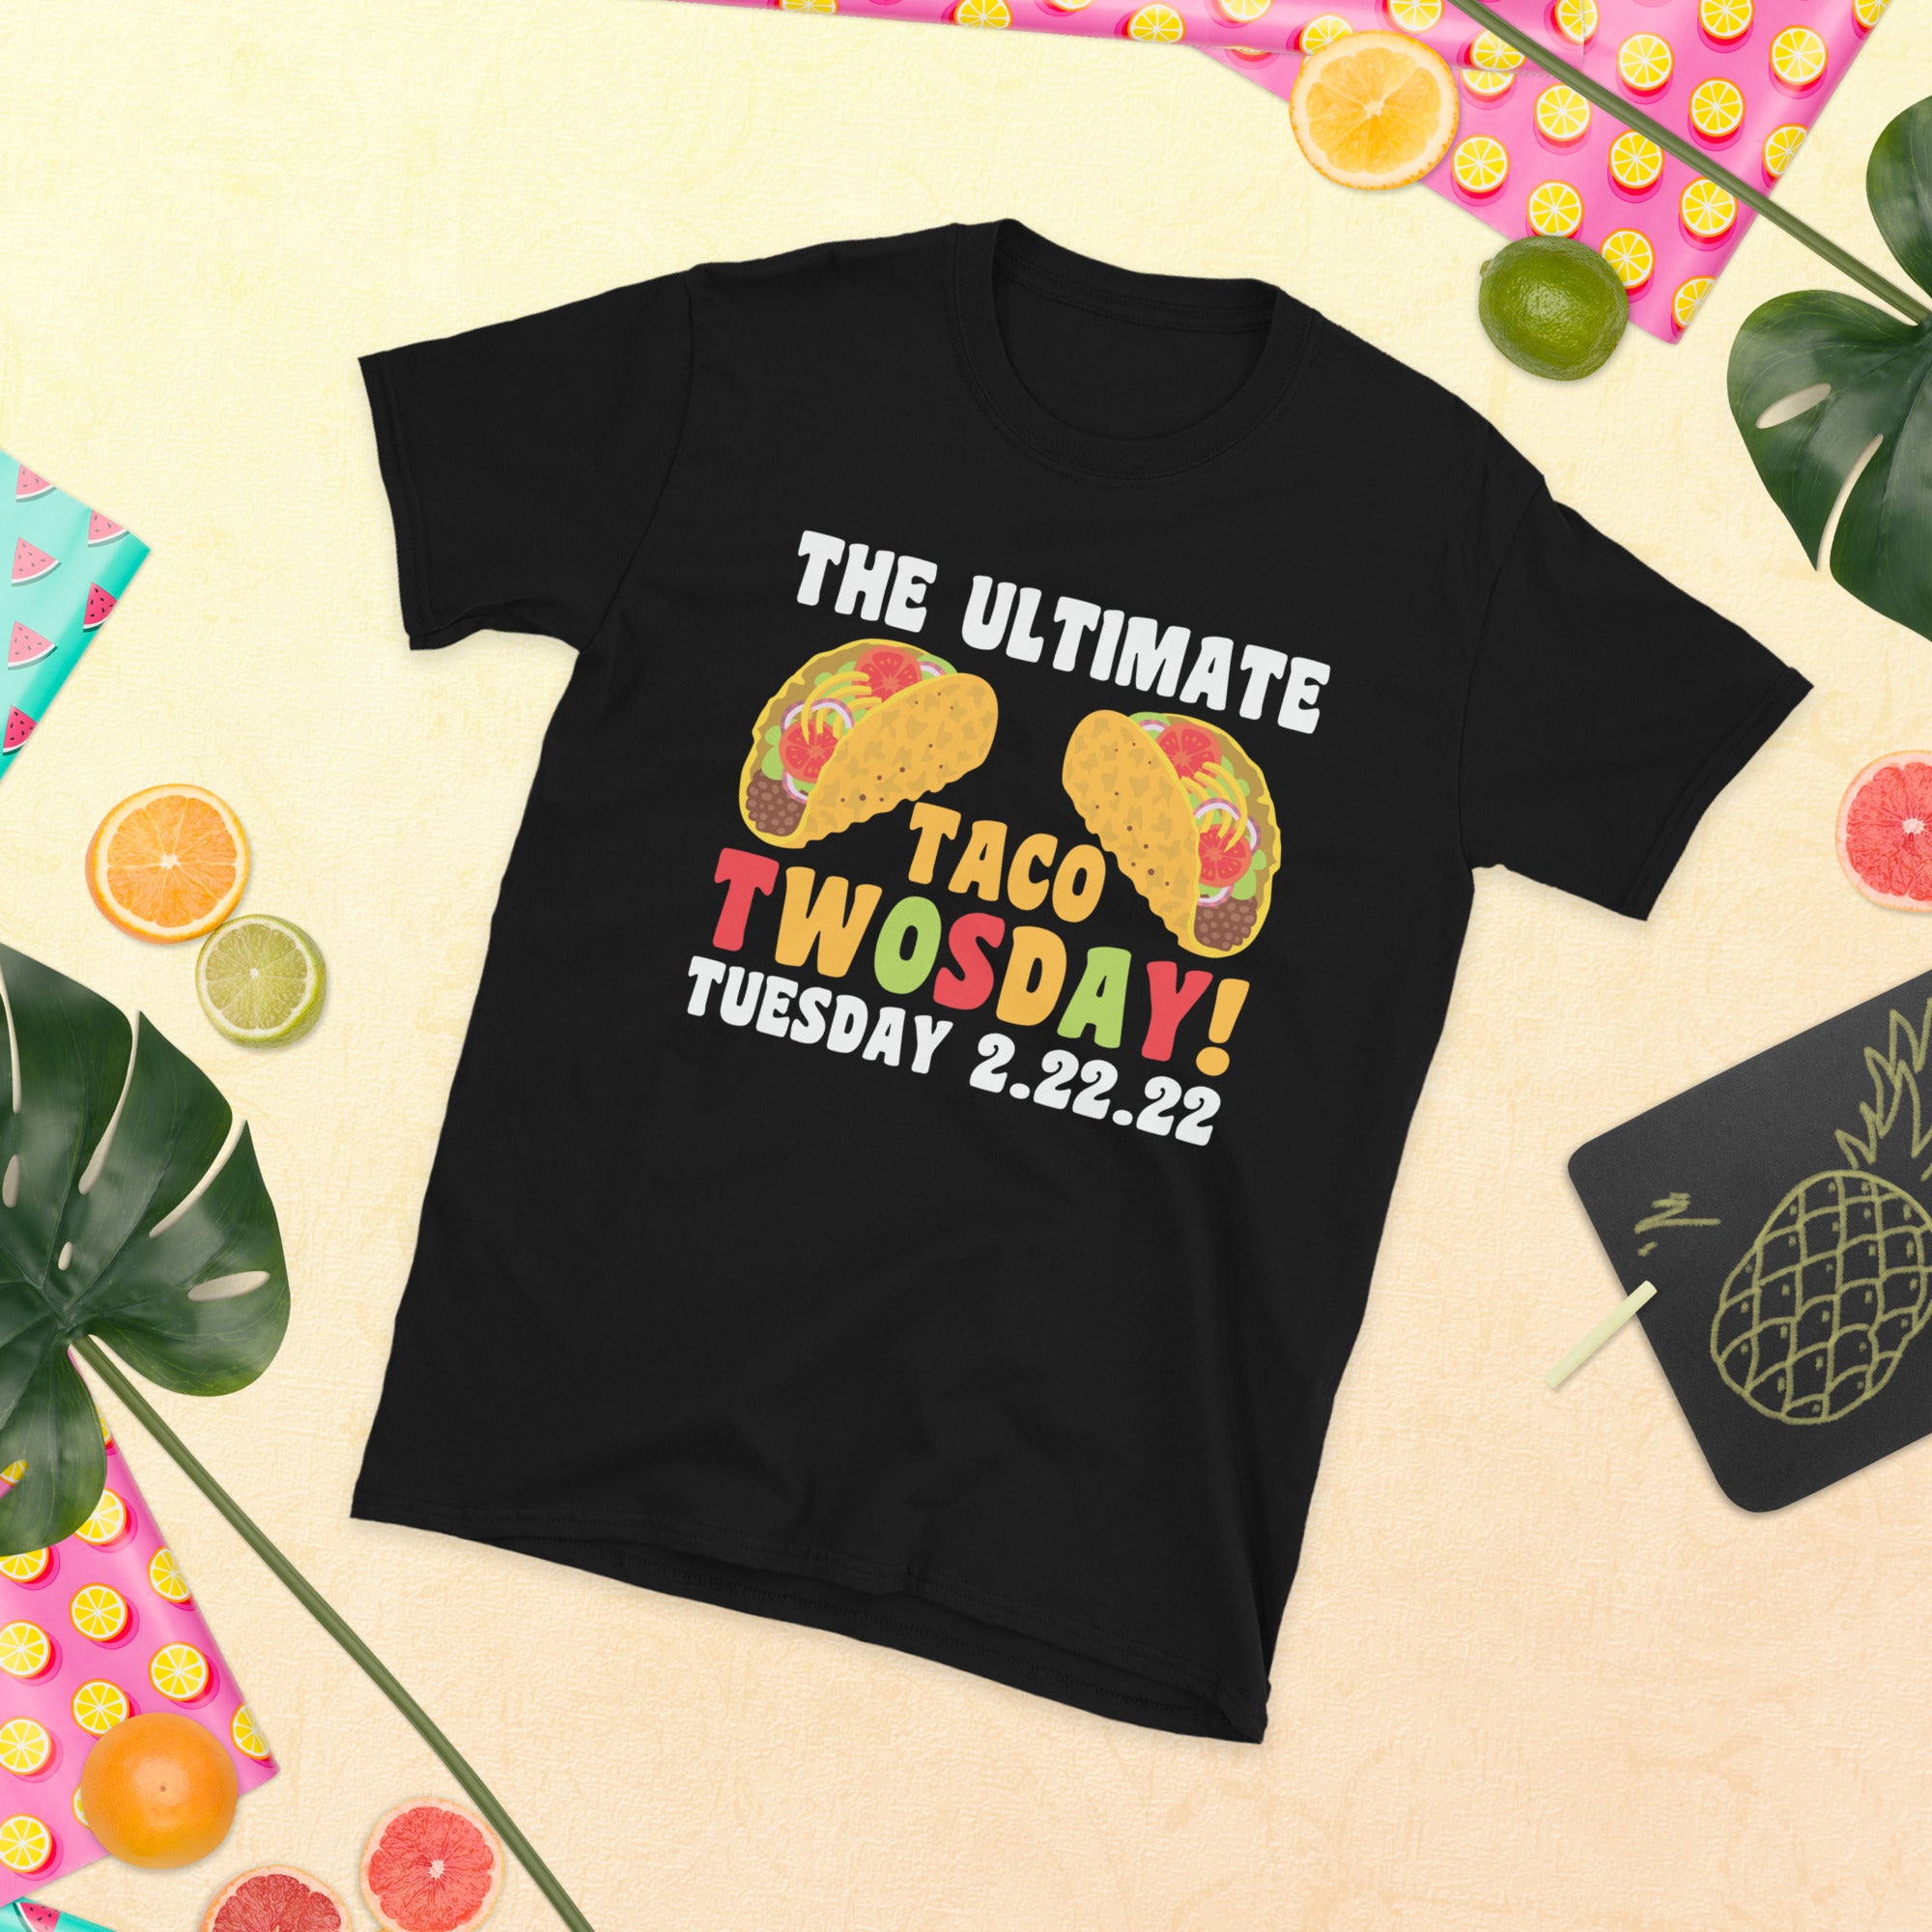 Taco Twosday Shirt, Tacos Lover Tshirt, Tuesday 2-22-22, Taco Tuesday Tee, The Ultimate Taco Twosday, February 22nd 2022, Funny Twosday Gift - Madeinsea©